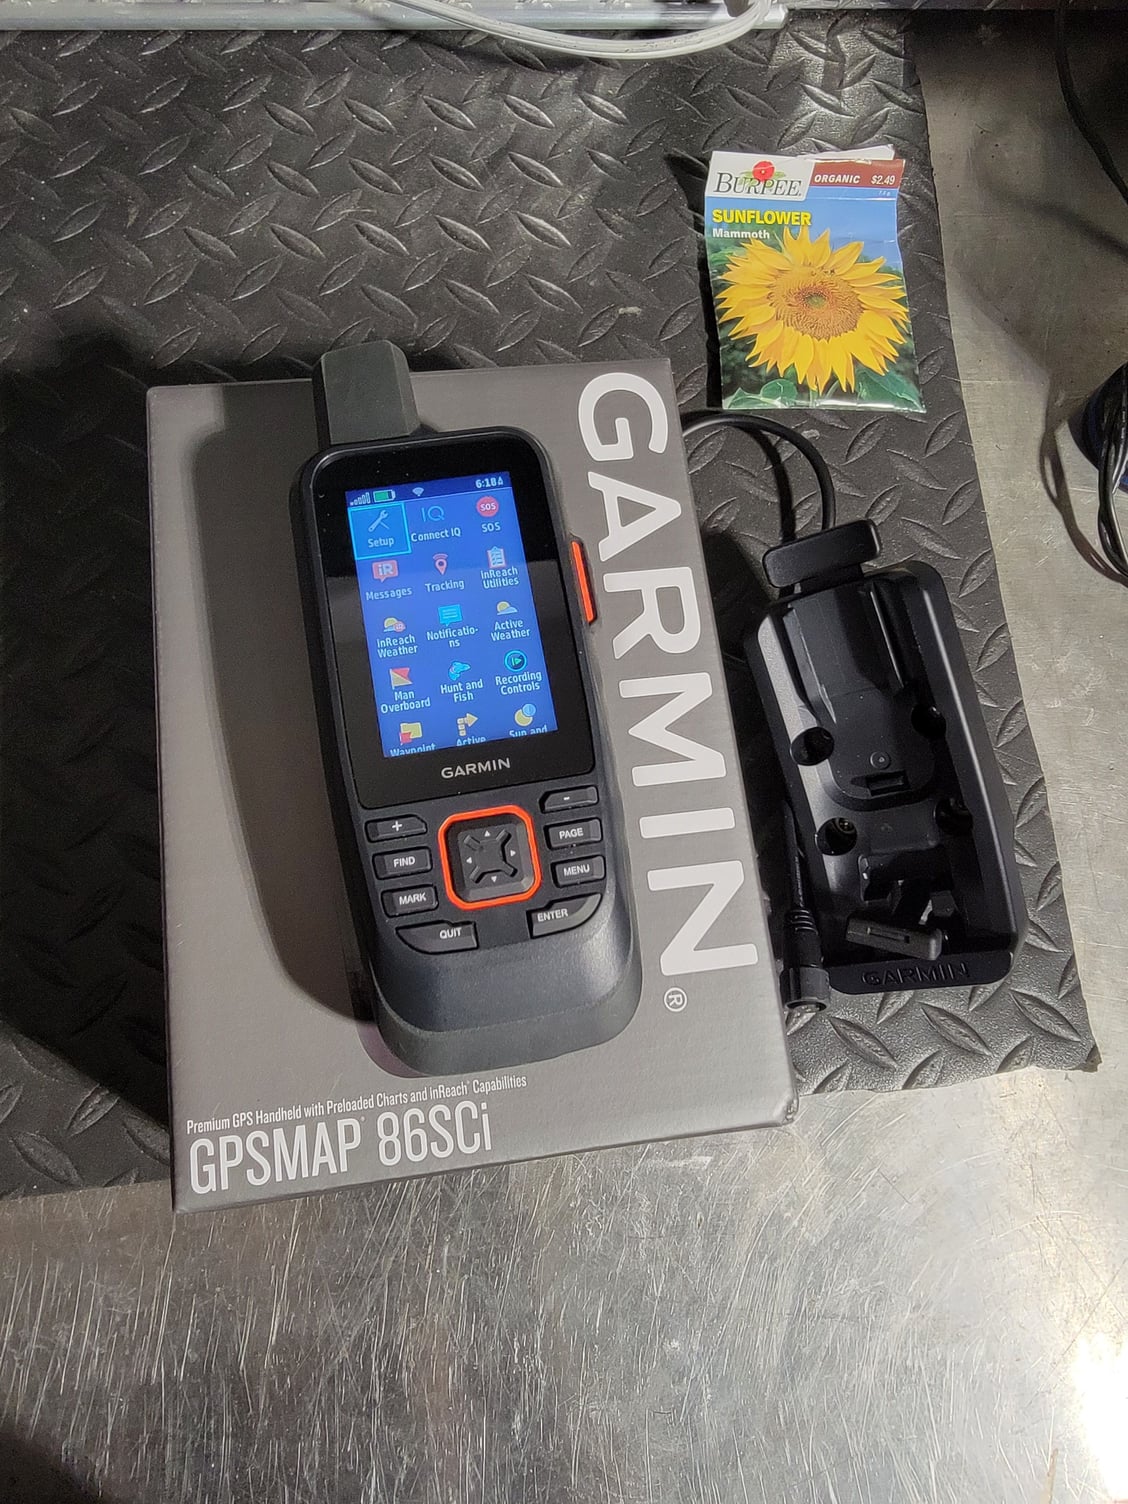 Garmin 86sci handheld portable gps - The Hull Truth - Boating and Fishing  Forum